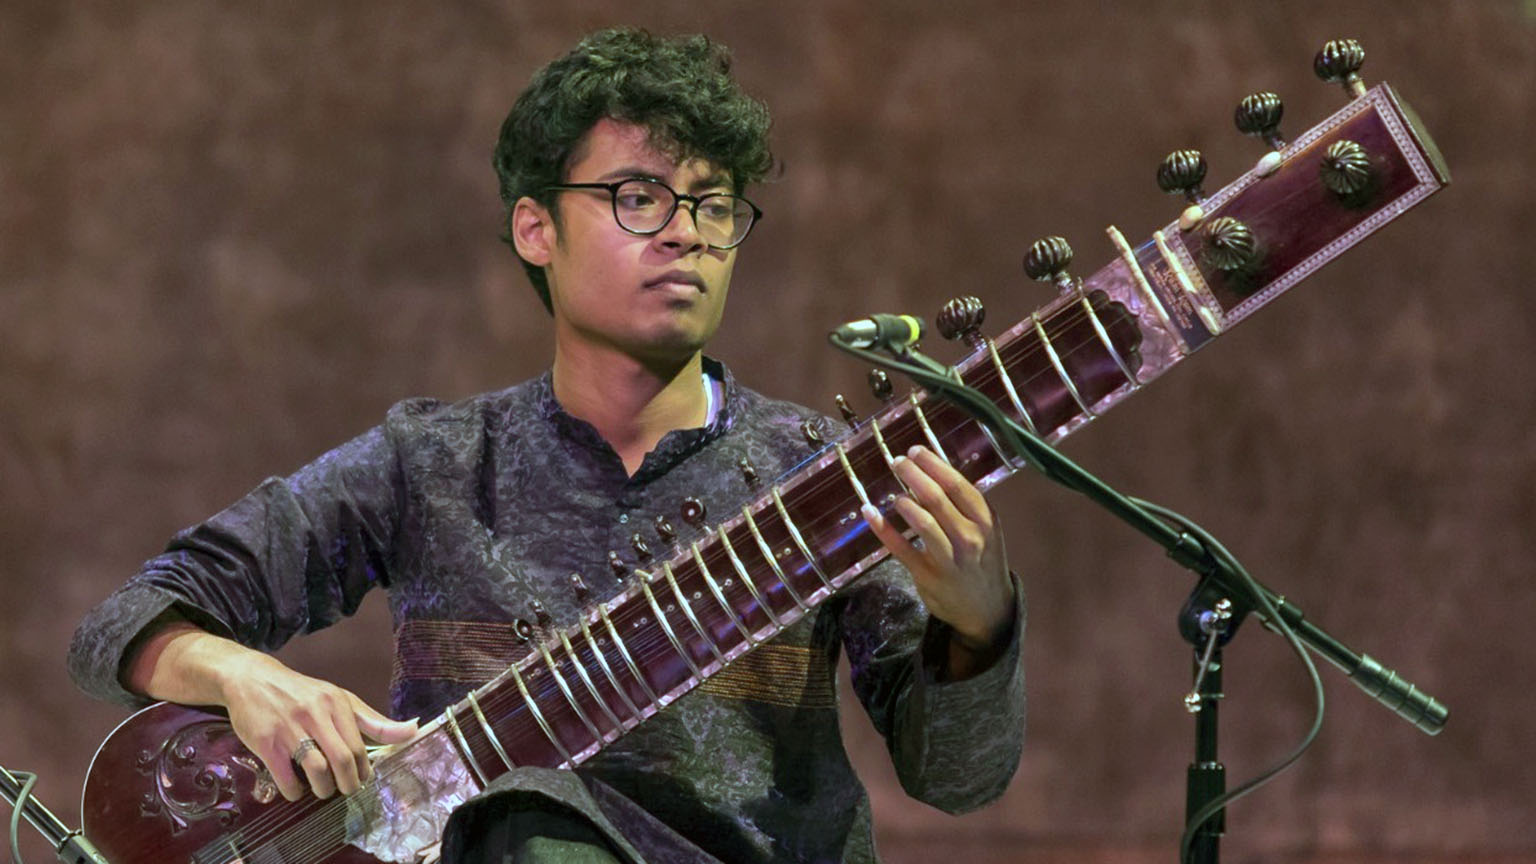 Snehesh performing with a sitar, a classical hindustani instrument.